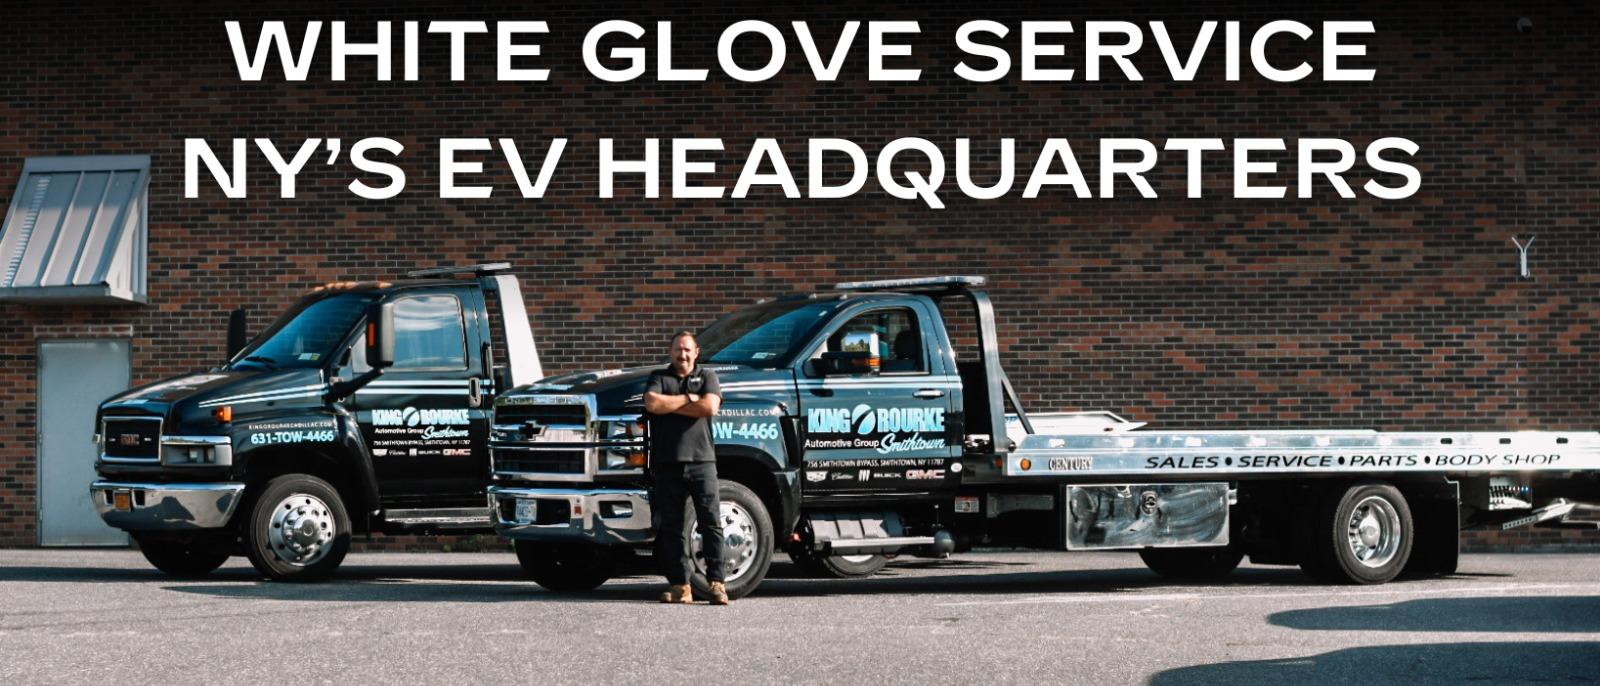 WHITE GLOVE SERVICE FROM KING O'ROURKE BUICK GMC ON LONG ISLAND, NY